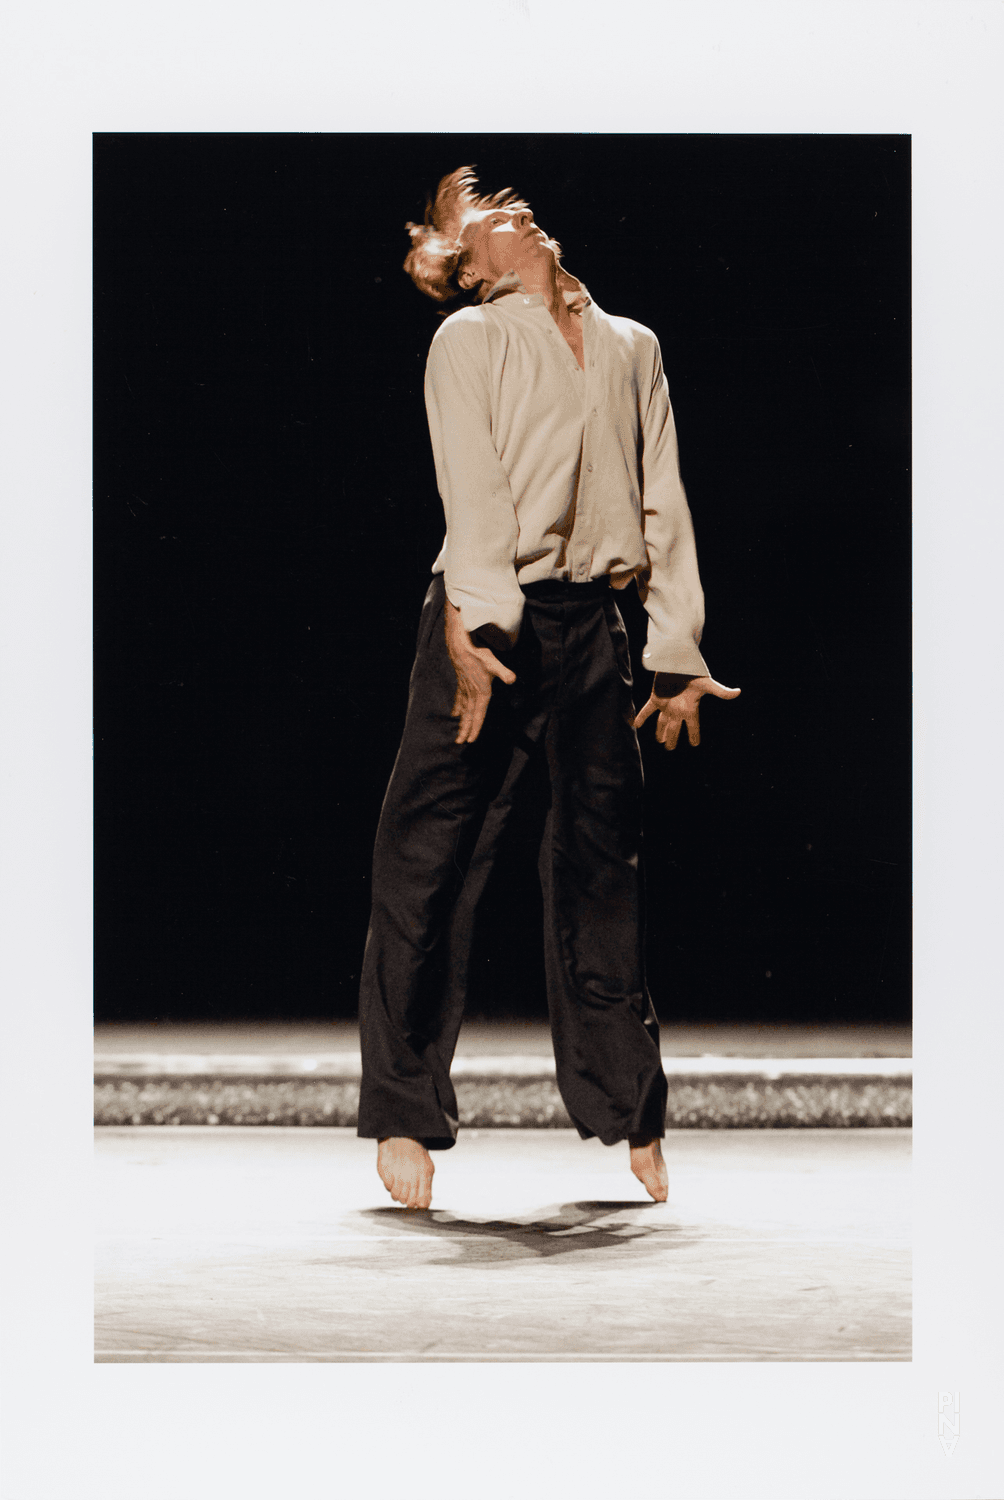 Dominique Mercy in “Vollmond (Full Moon)” by Pina Bausch